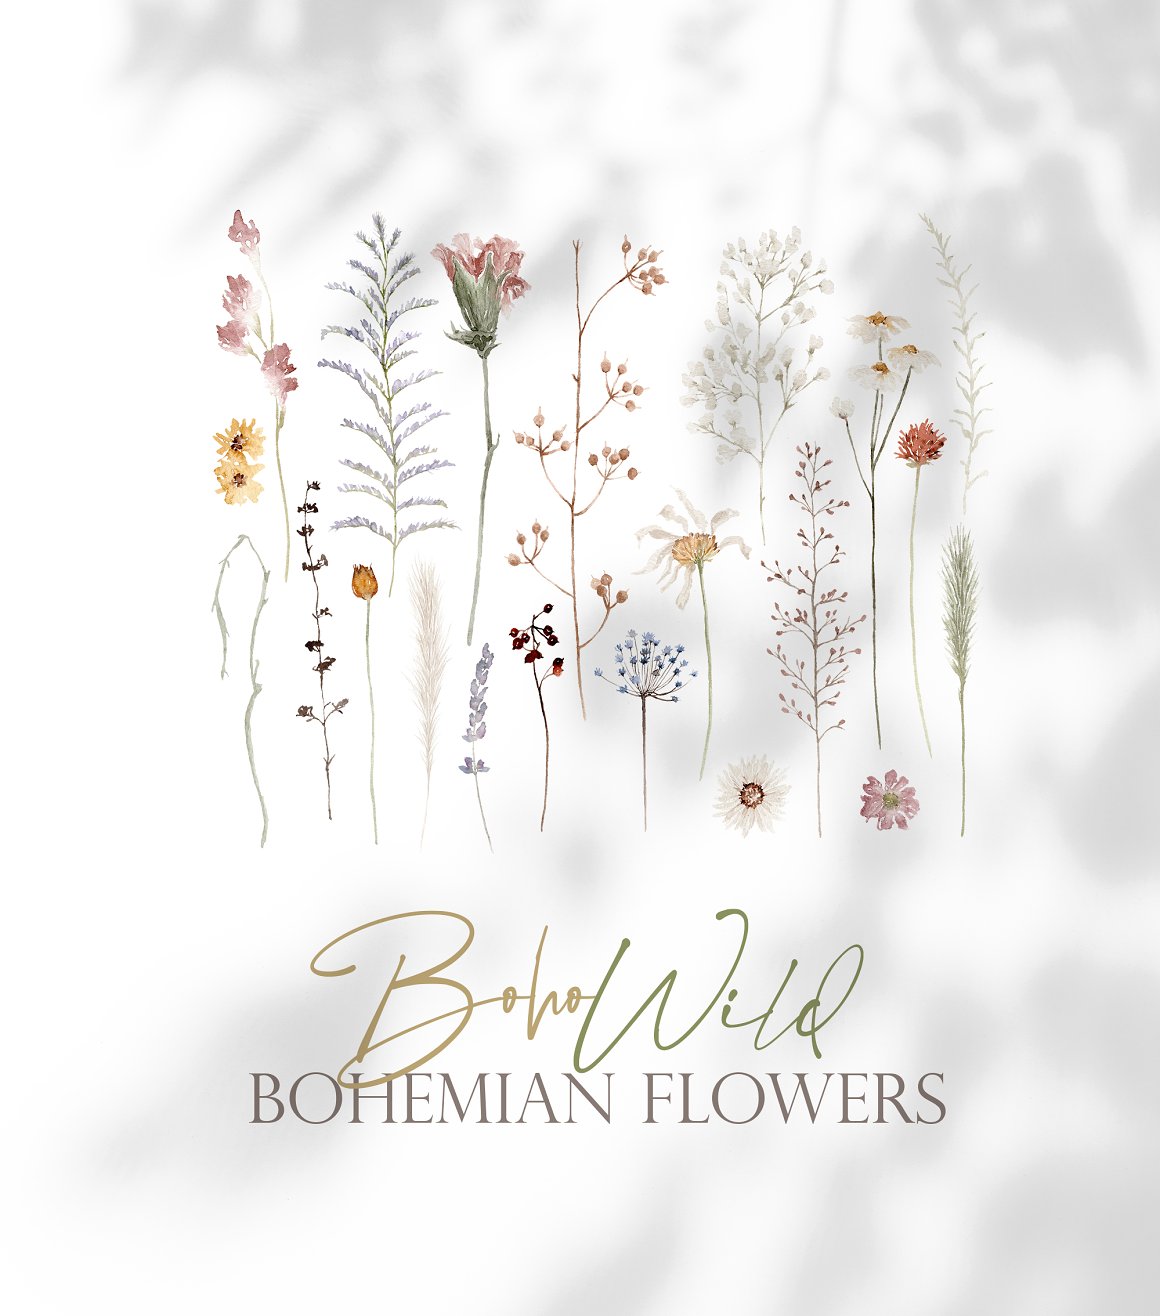 Lettering "Boho Wild Bohemian Flowers" and floral illustration on a gray background.